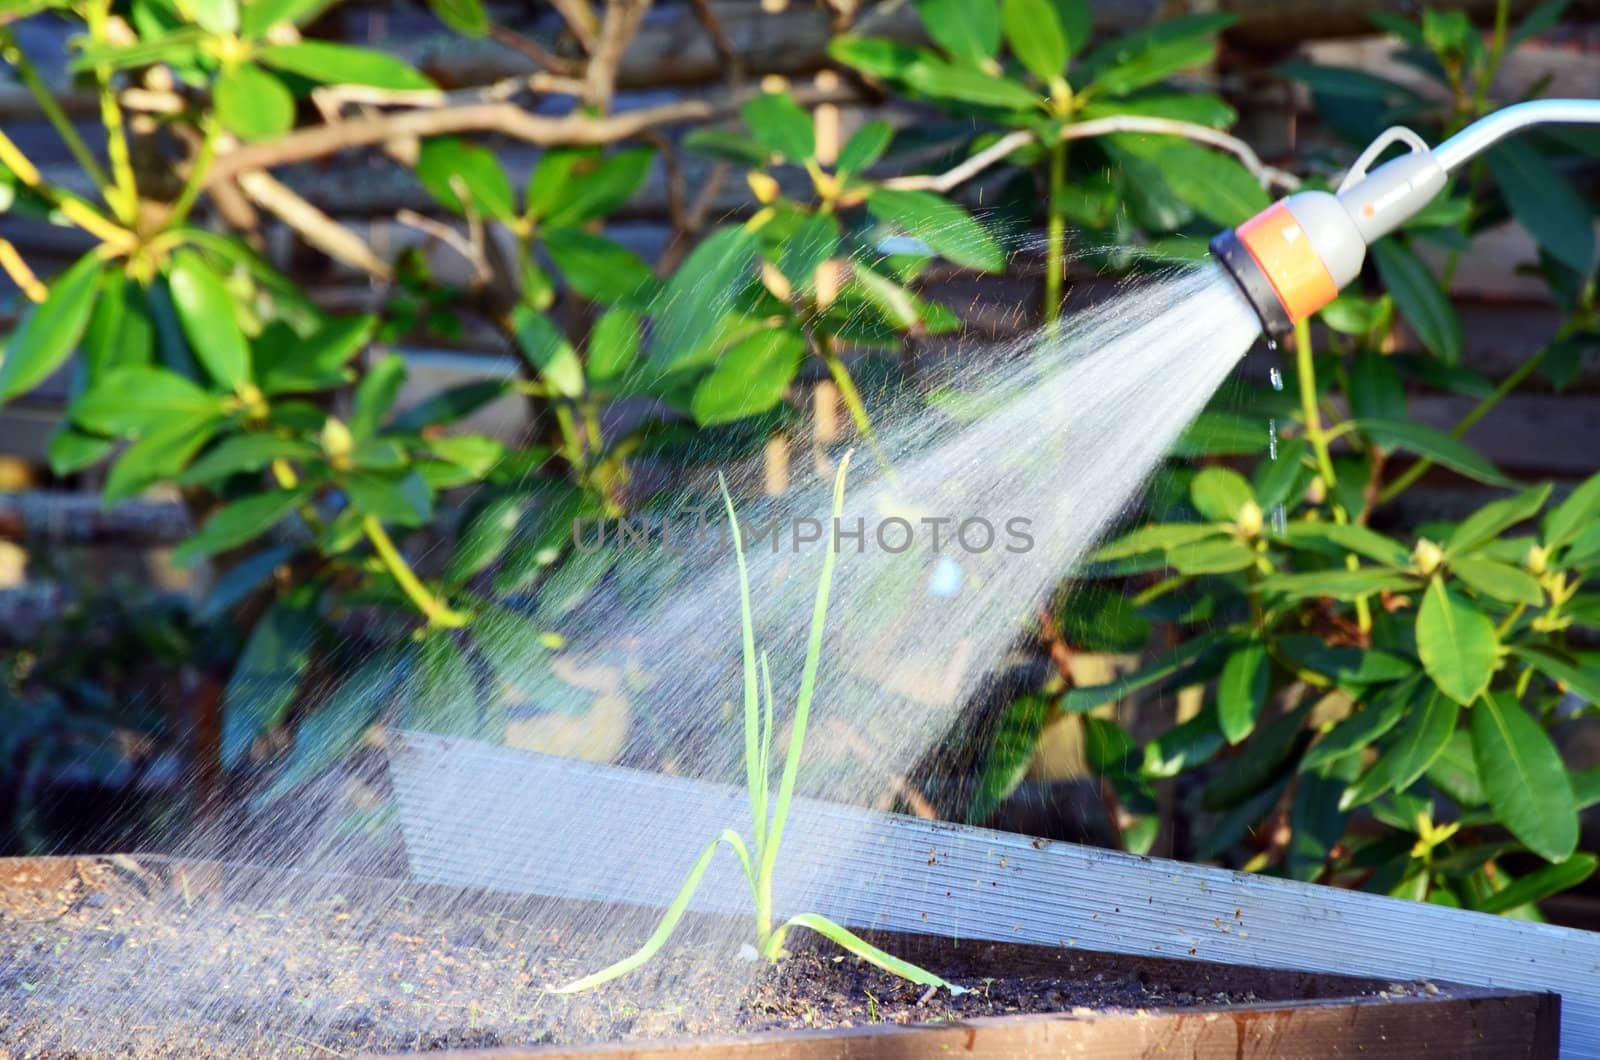 Irrigation of one plant in the garden